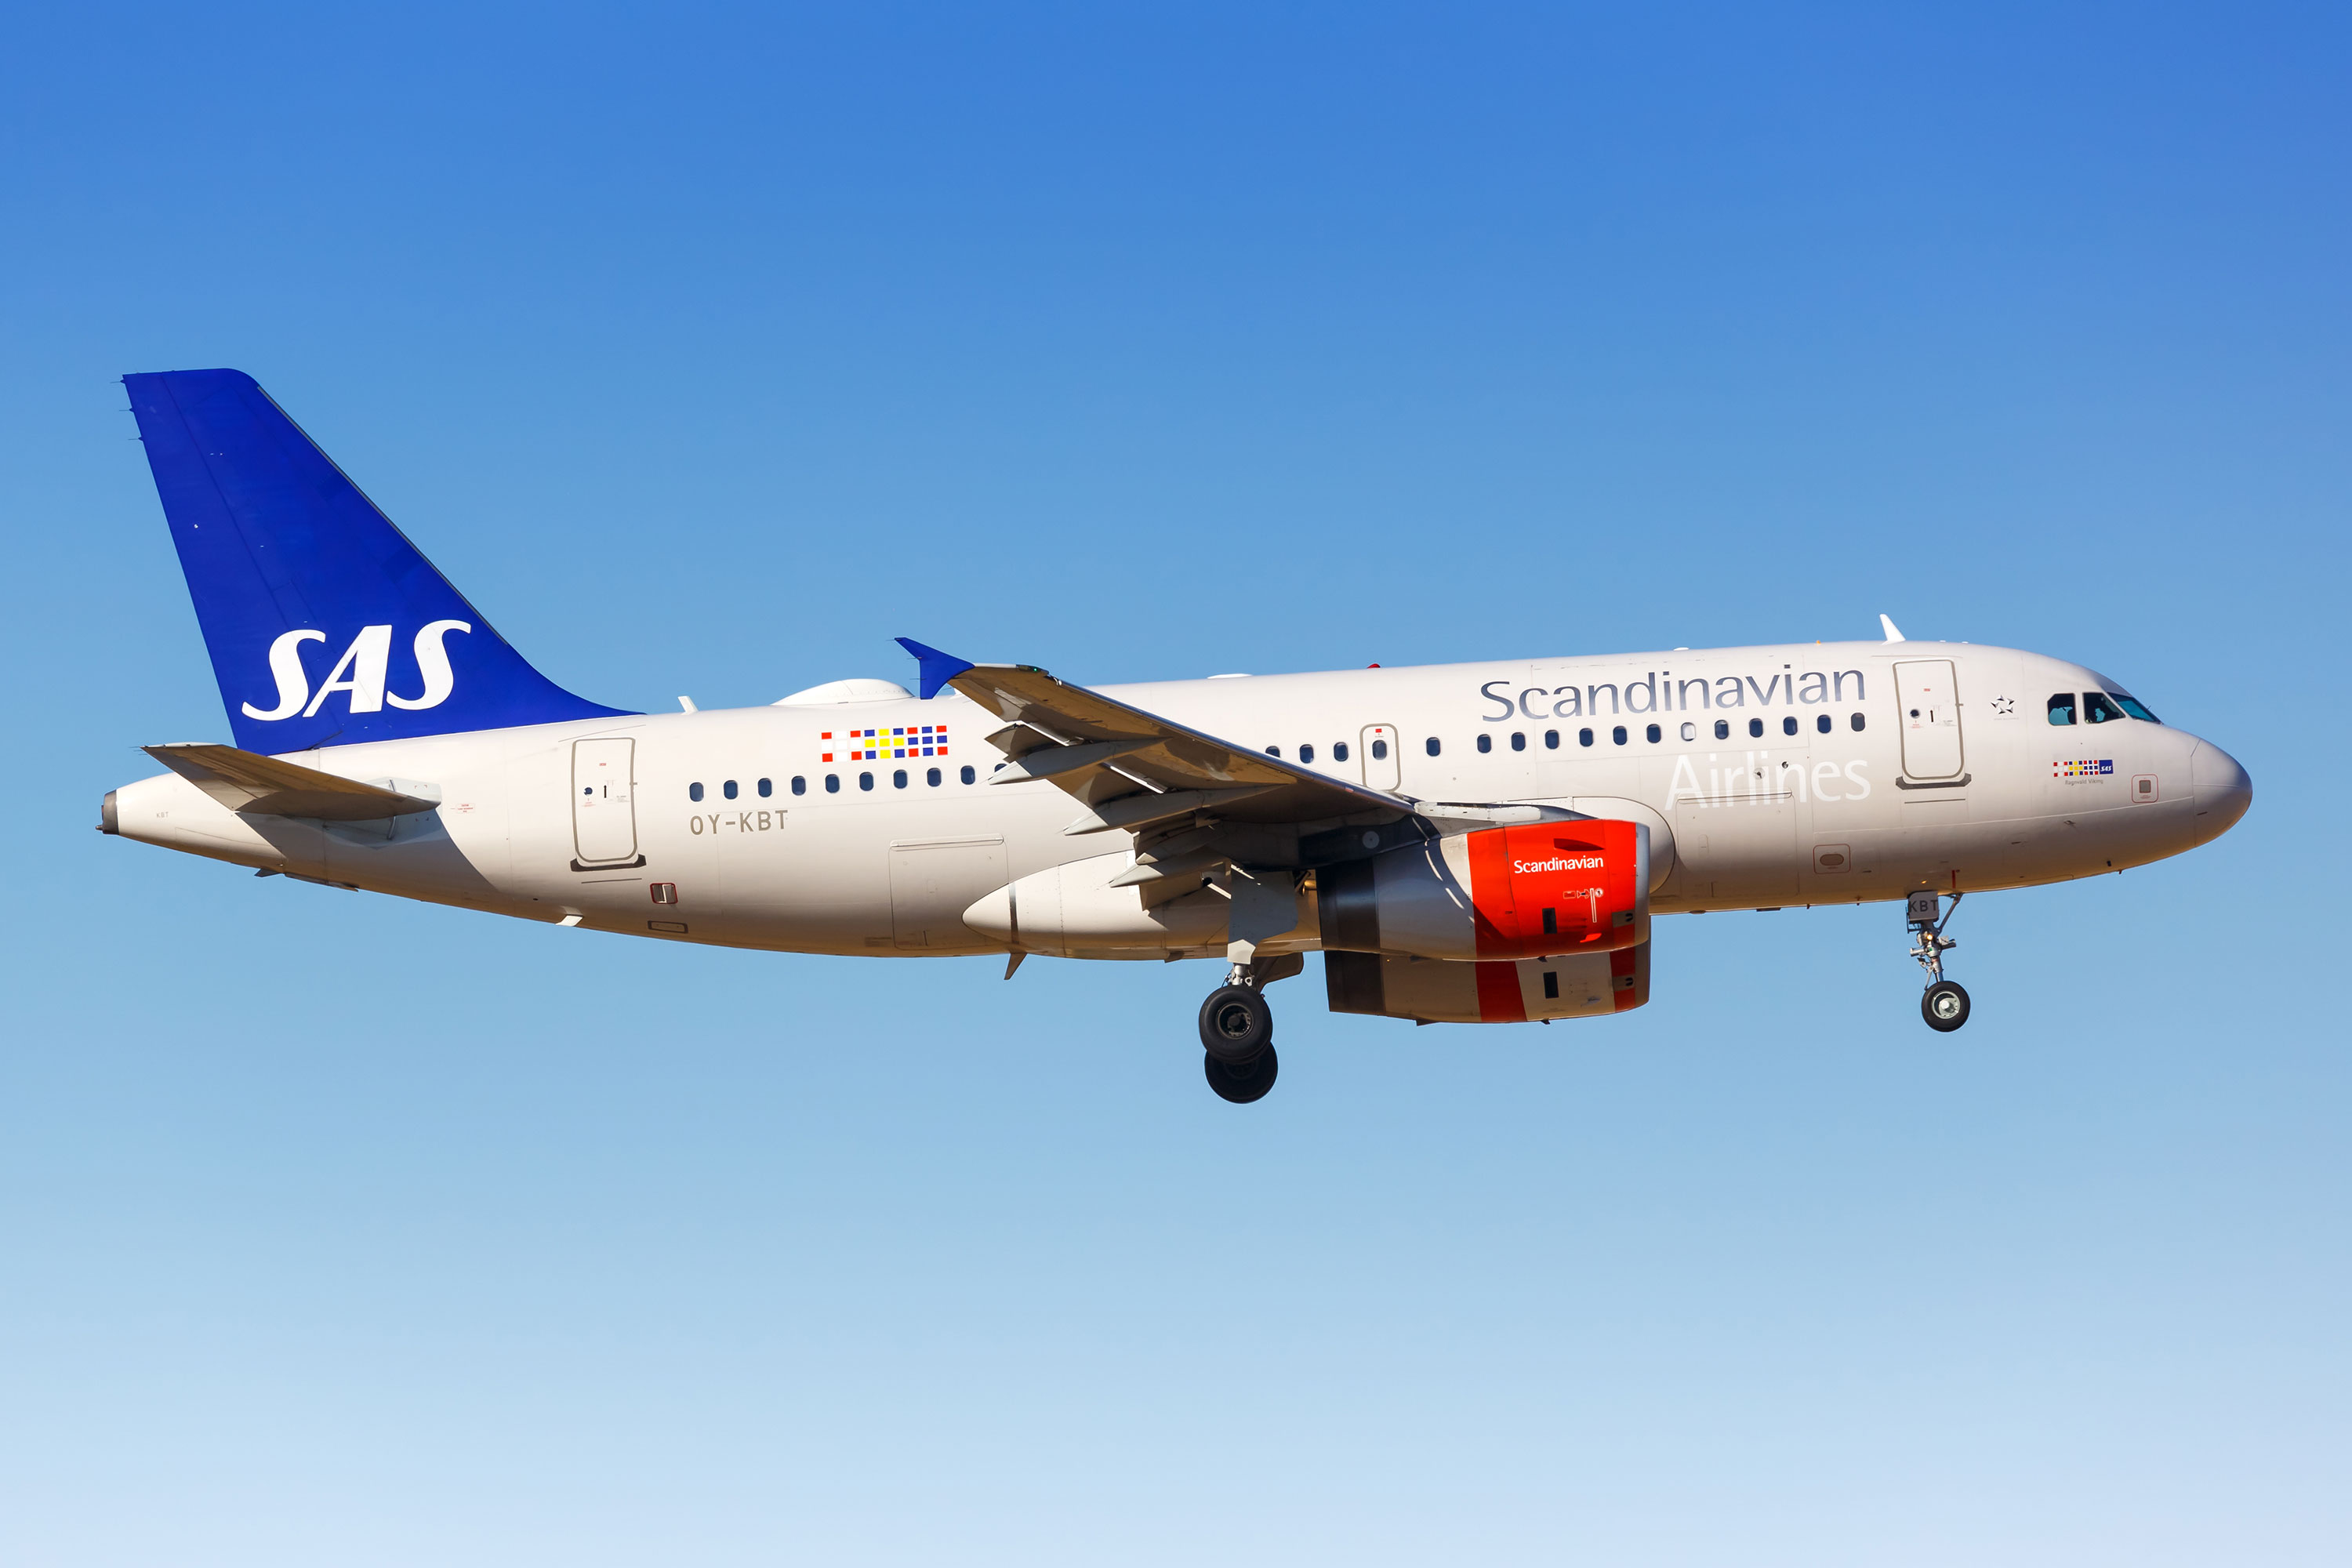 A Scandinavian Airlines plane arrives at Malaga Airport in Spain, on July 28, 2018.